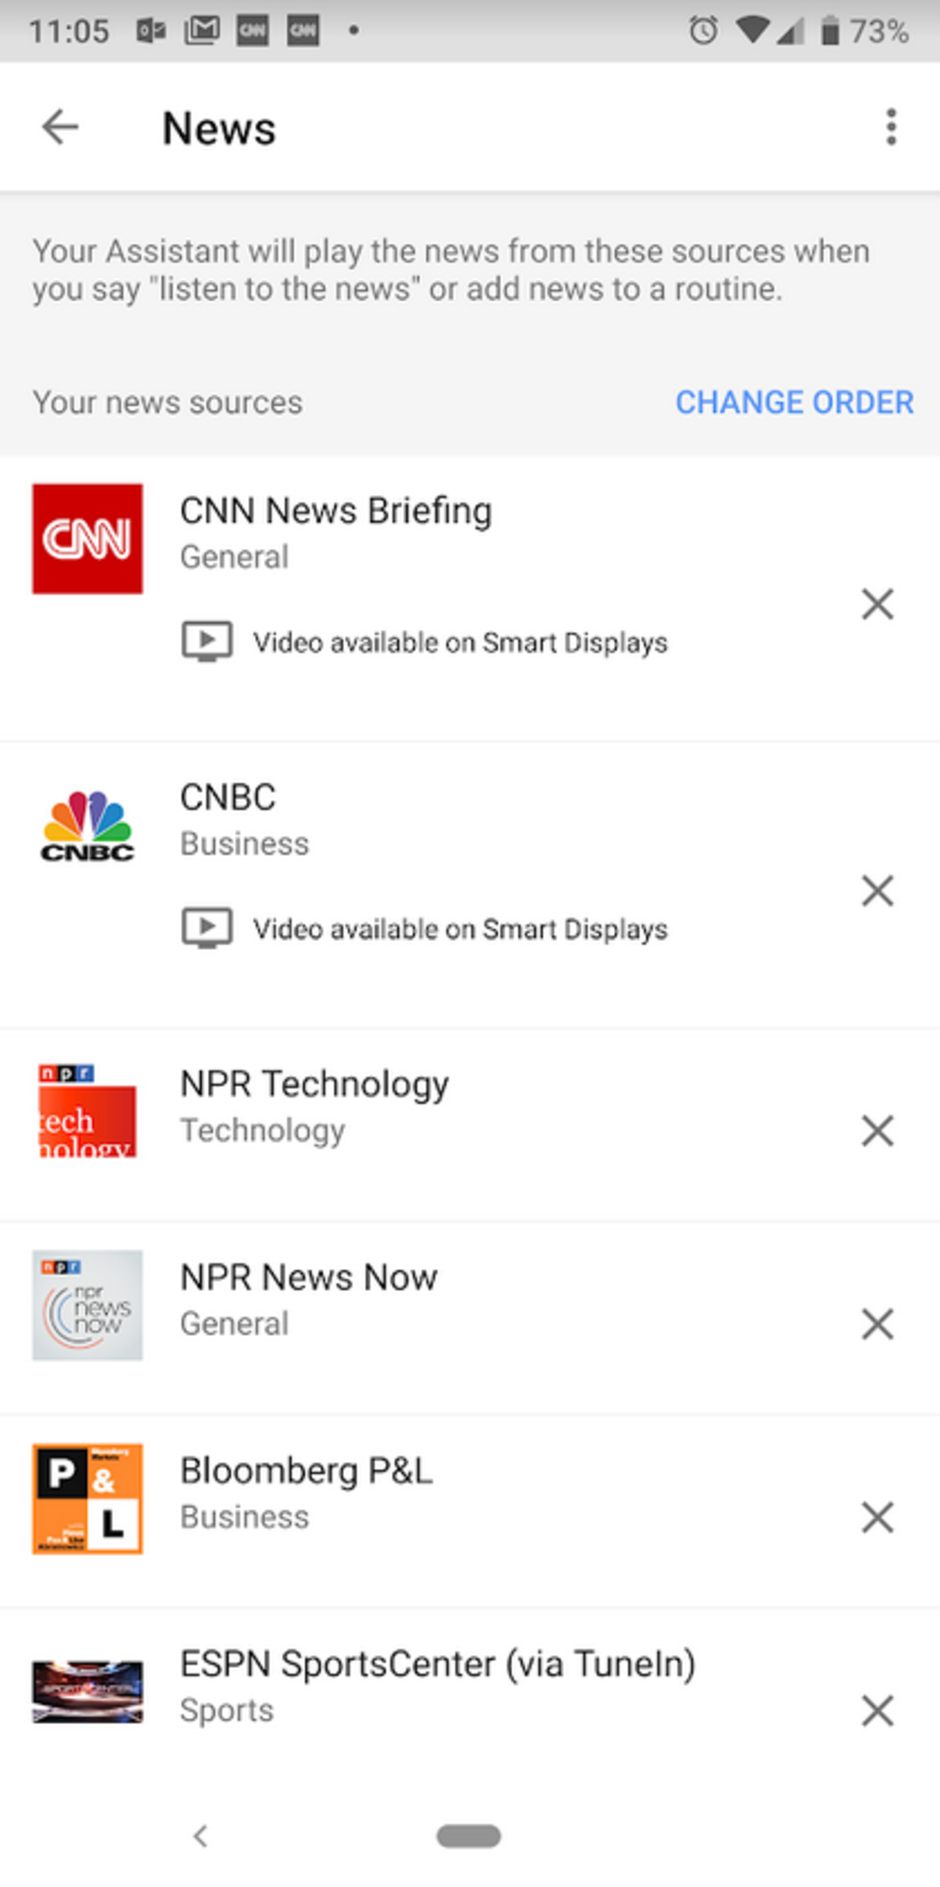 Set your routine to include a news briefing from one or more of these sources - Google Assistant Routine is now part of the Android Clock app